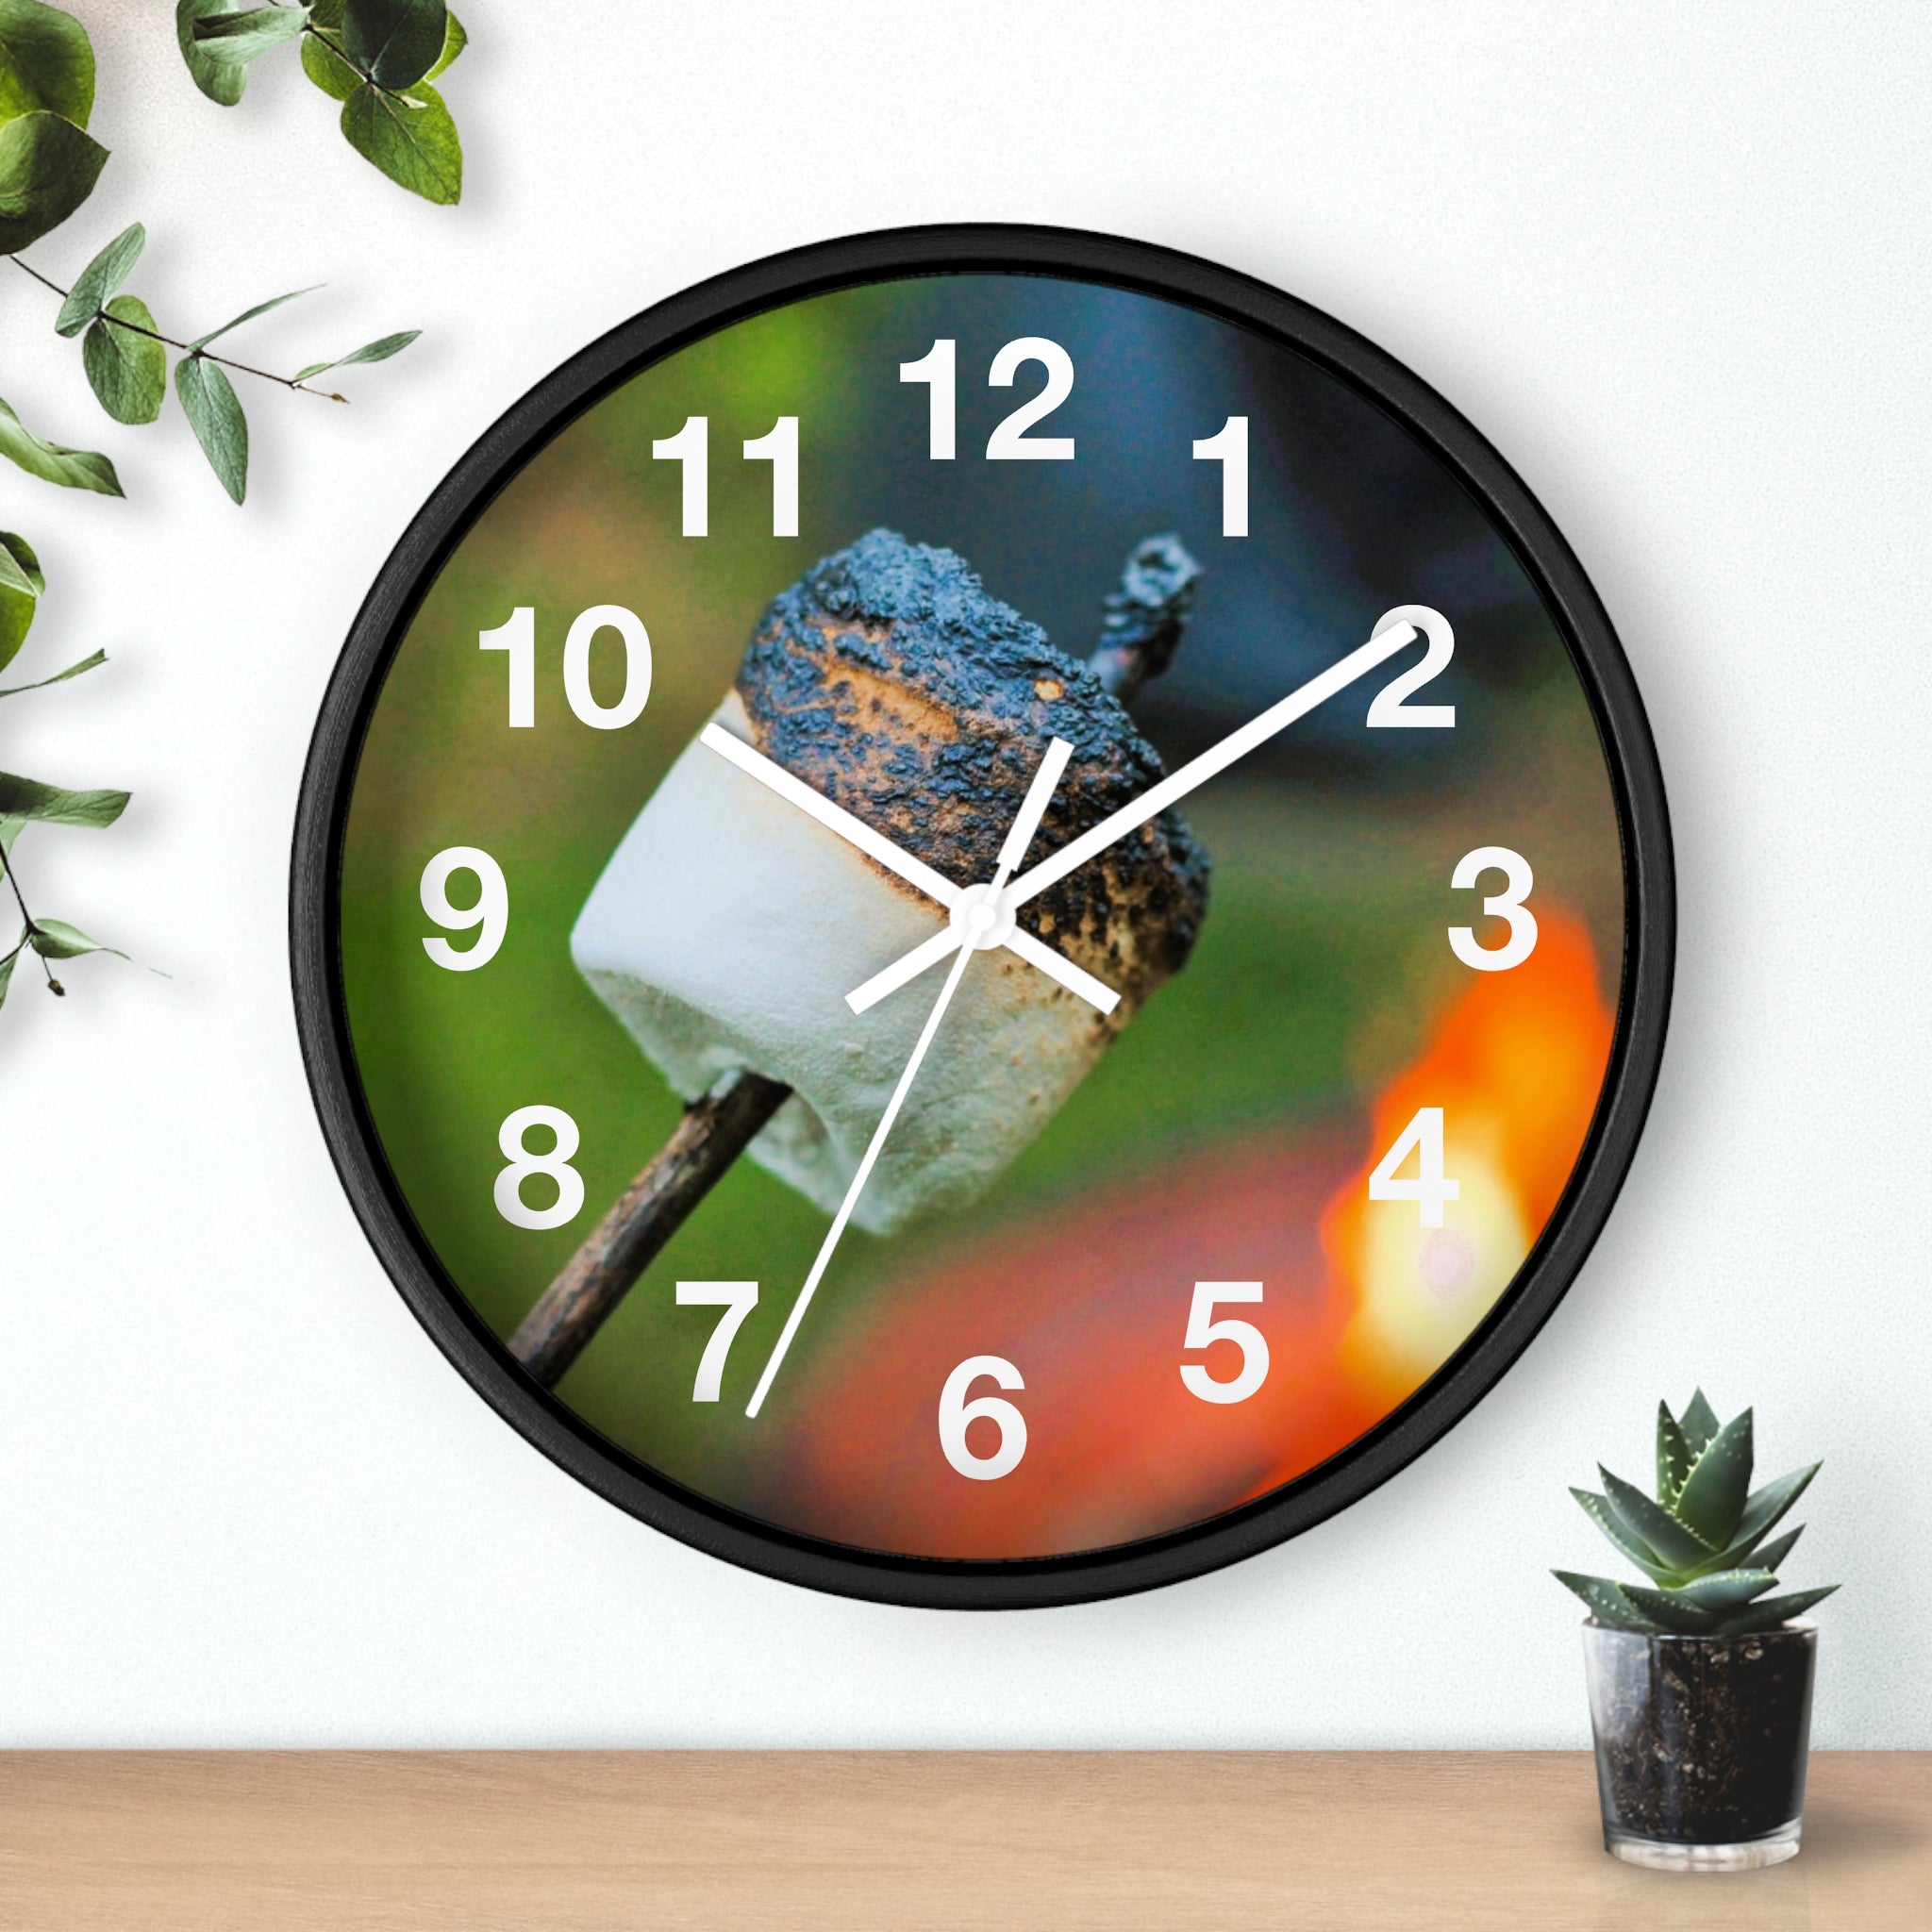 Roasted Marshmallow on a Stick Smores Wall Clock - Shell Design Boutique